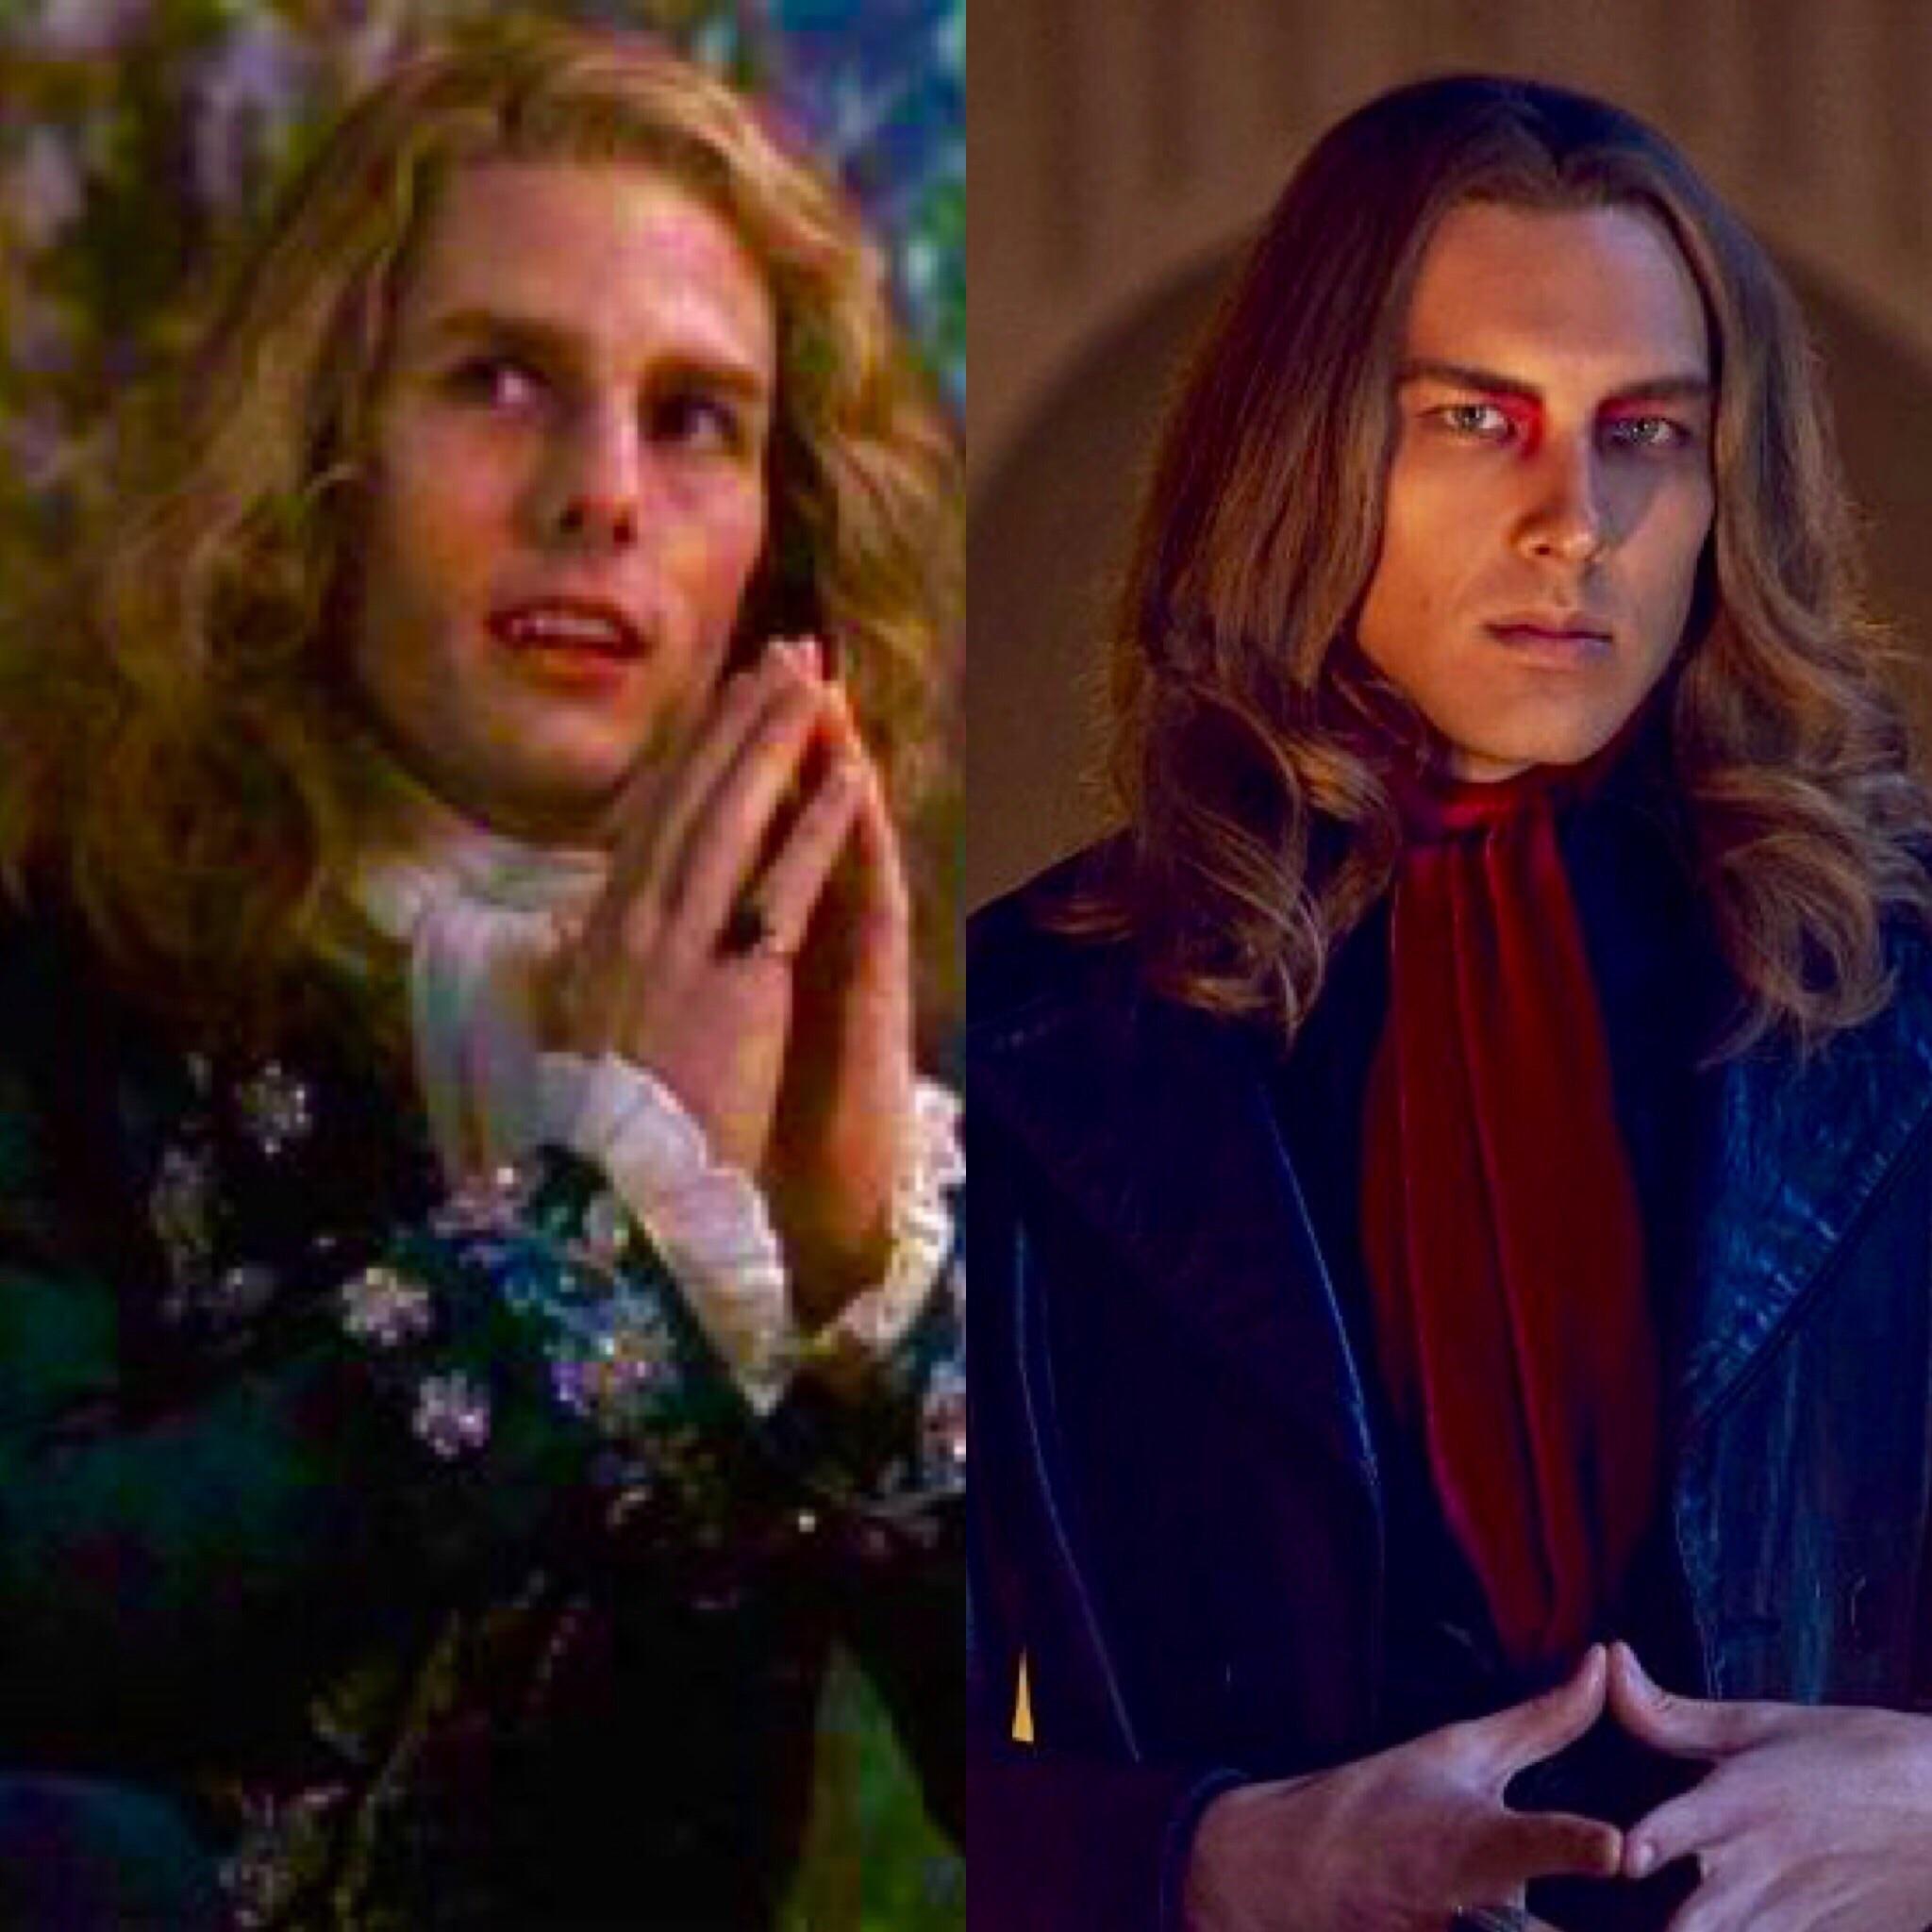 Does anyone else see the Vampire Lestat from “Interview with a